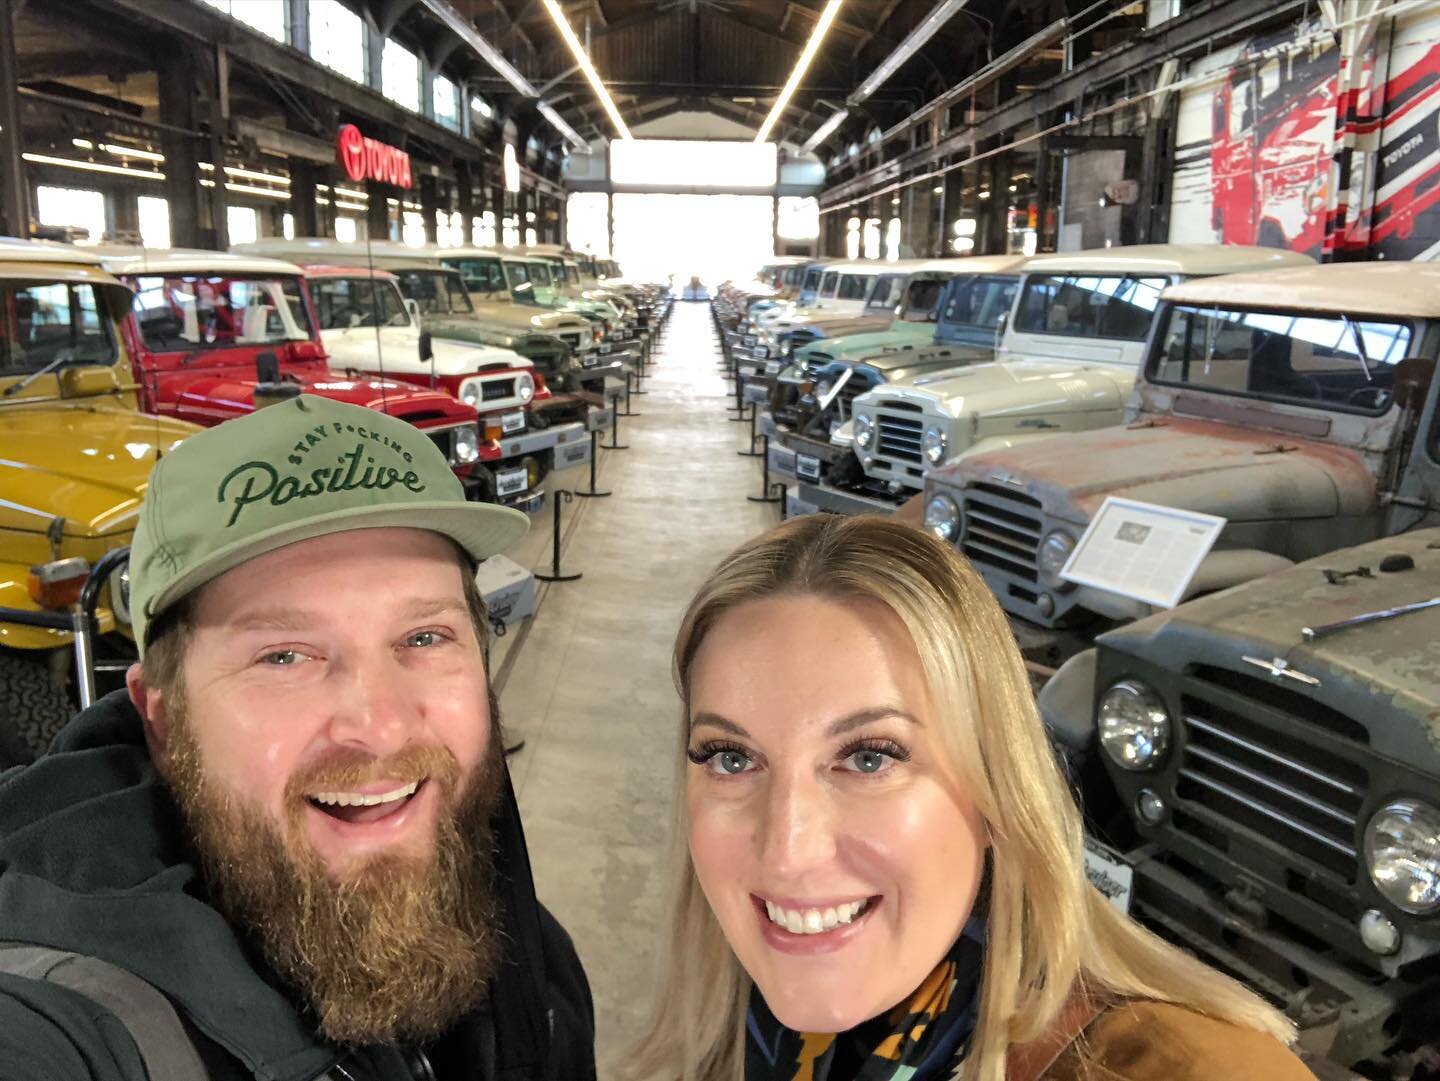 This was an epically fun day! Finally got to check out The Landcruiser Museum in Salt Lake City and it did not disappoint. They had the new, old, weathered, and burned all mixed together in their glory and each with their own story of origin and use.